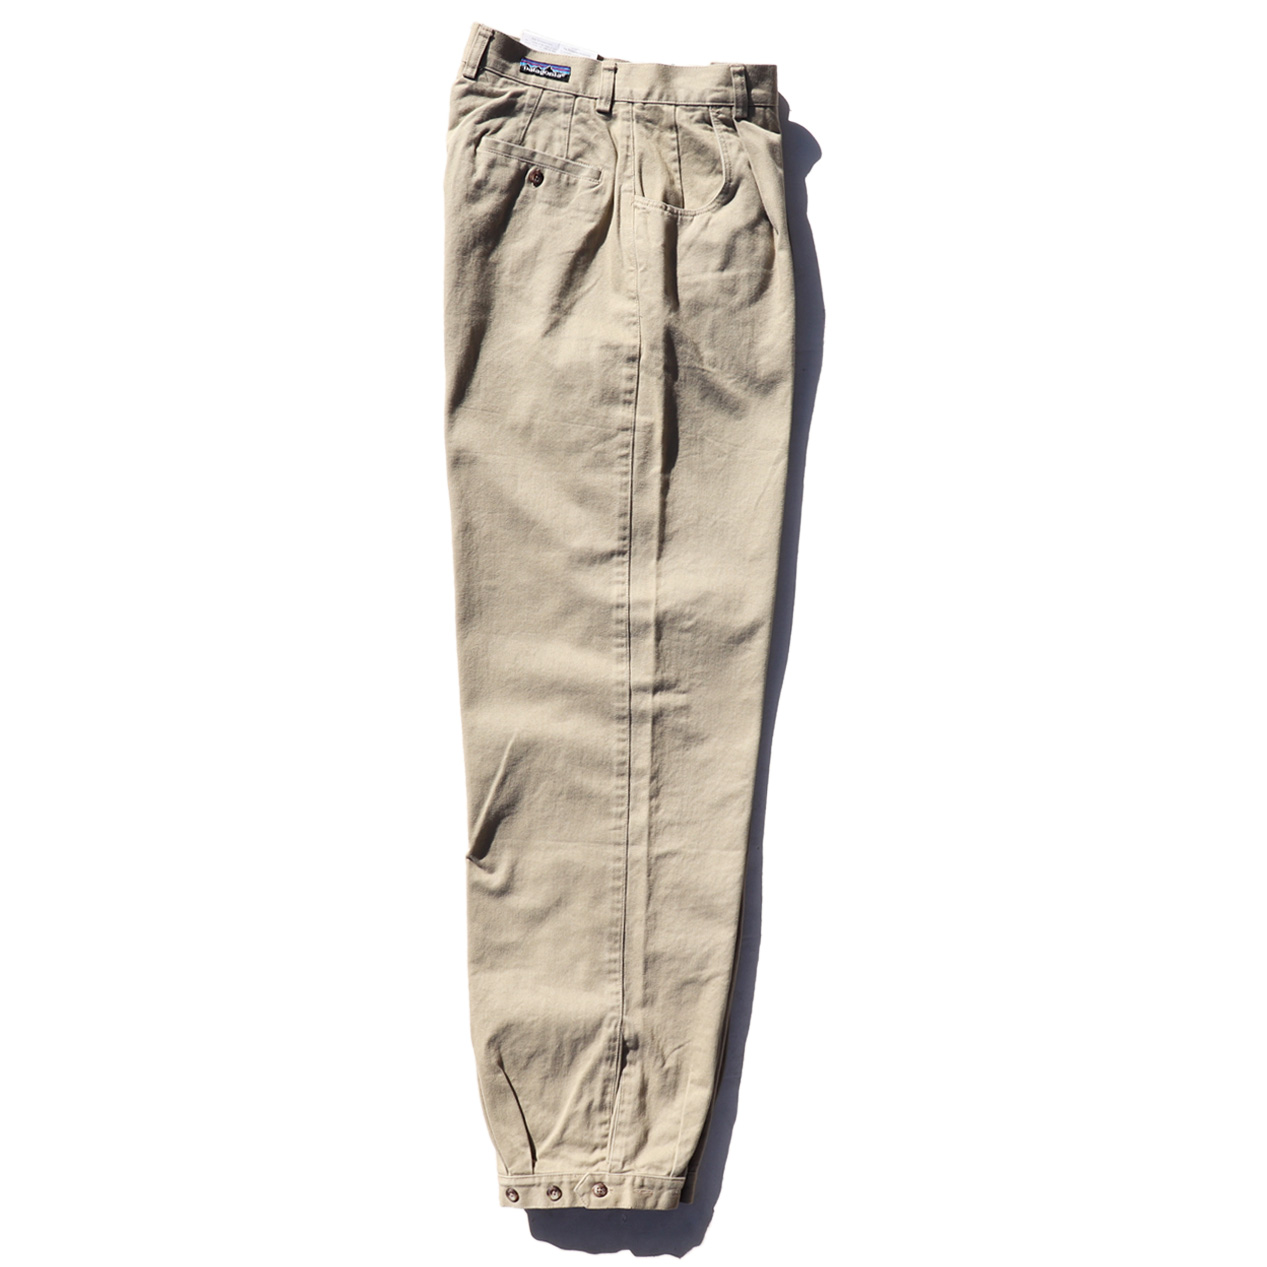 POST JUNK / 's PATAGONIA “W's BOMBACHAS” Cotton Twill Pants